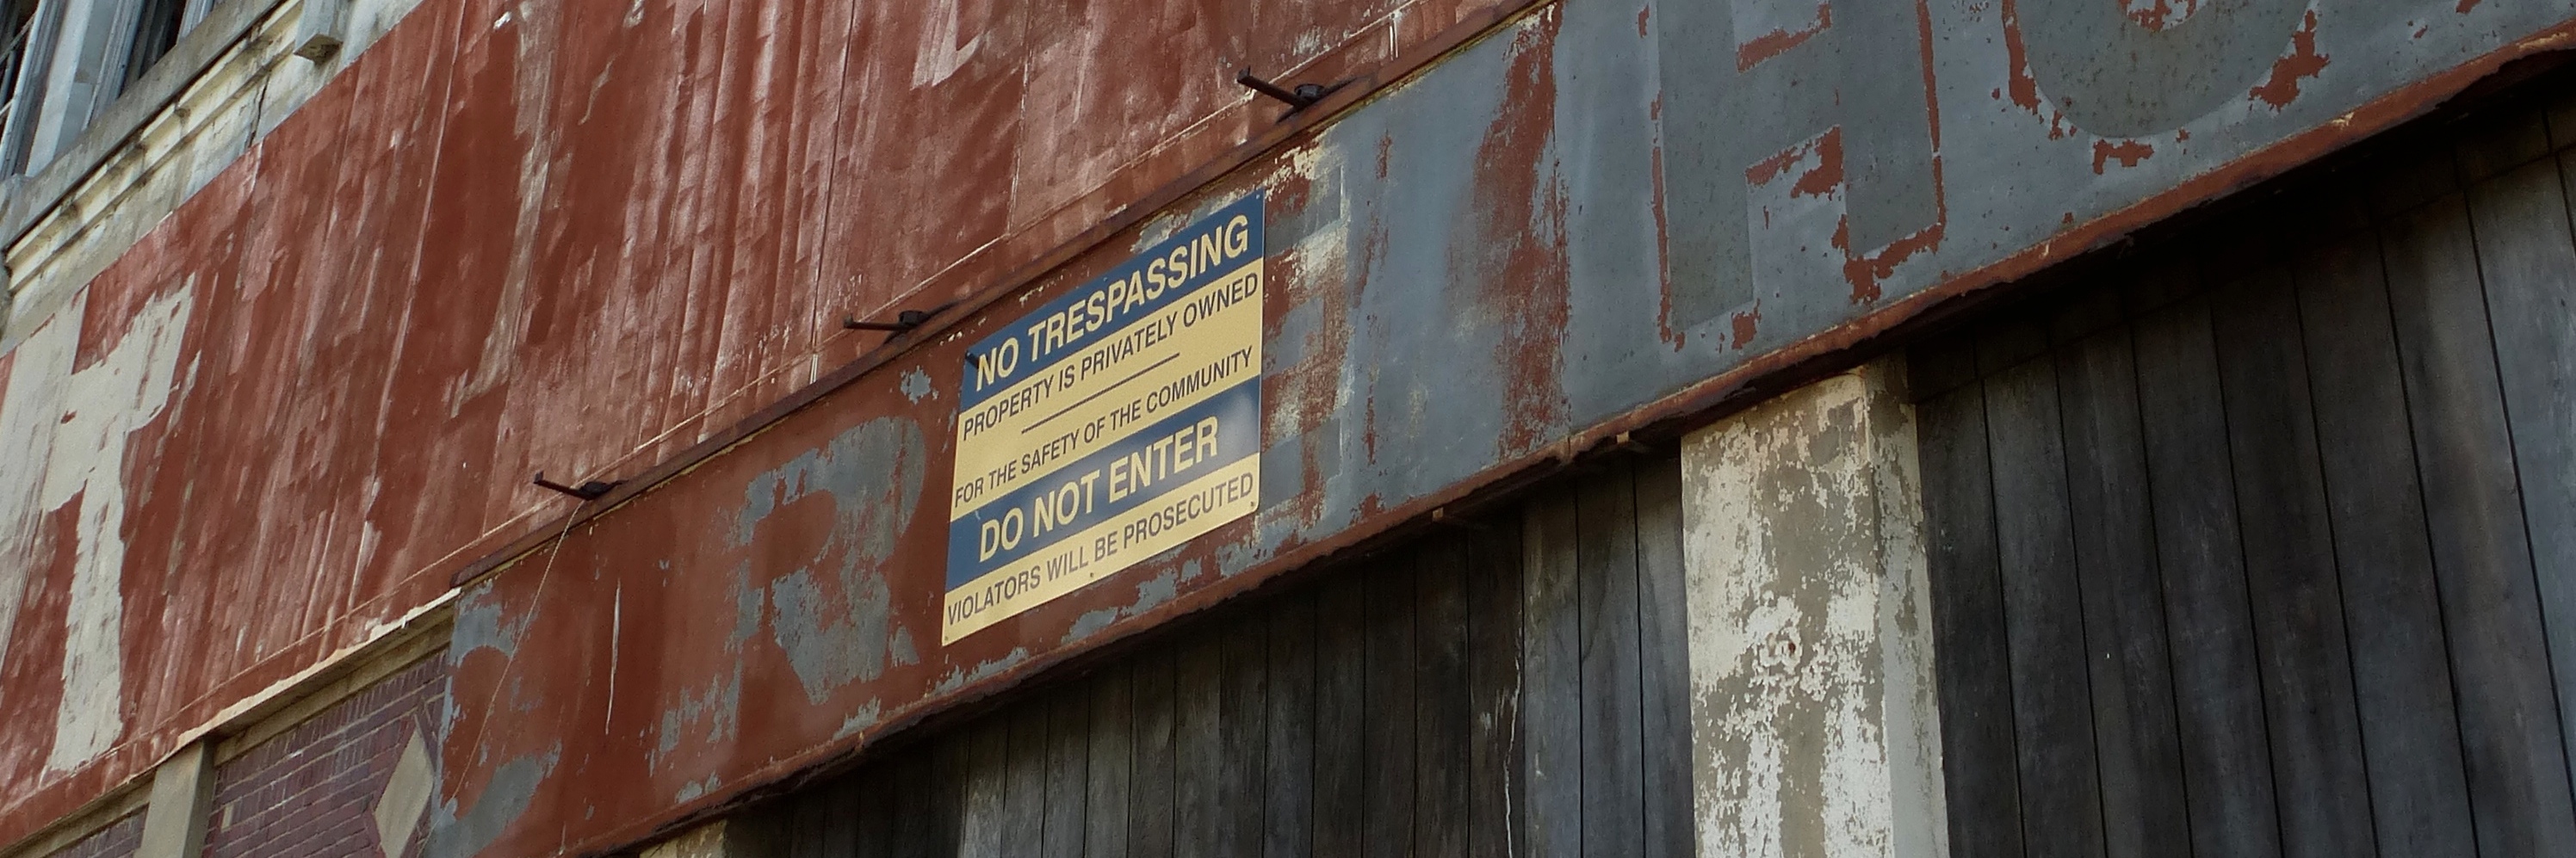 A section of the front of an abandoned building, with flaking paint, discolored wood, and rusty metal with large faded letters. Affixed to the metal is a yellow and black no-trespassing sign.